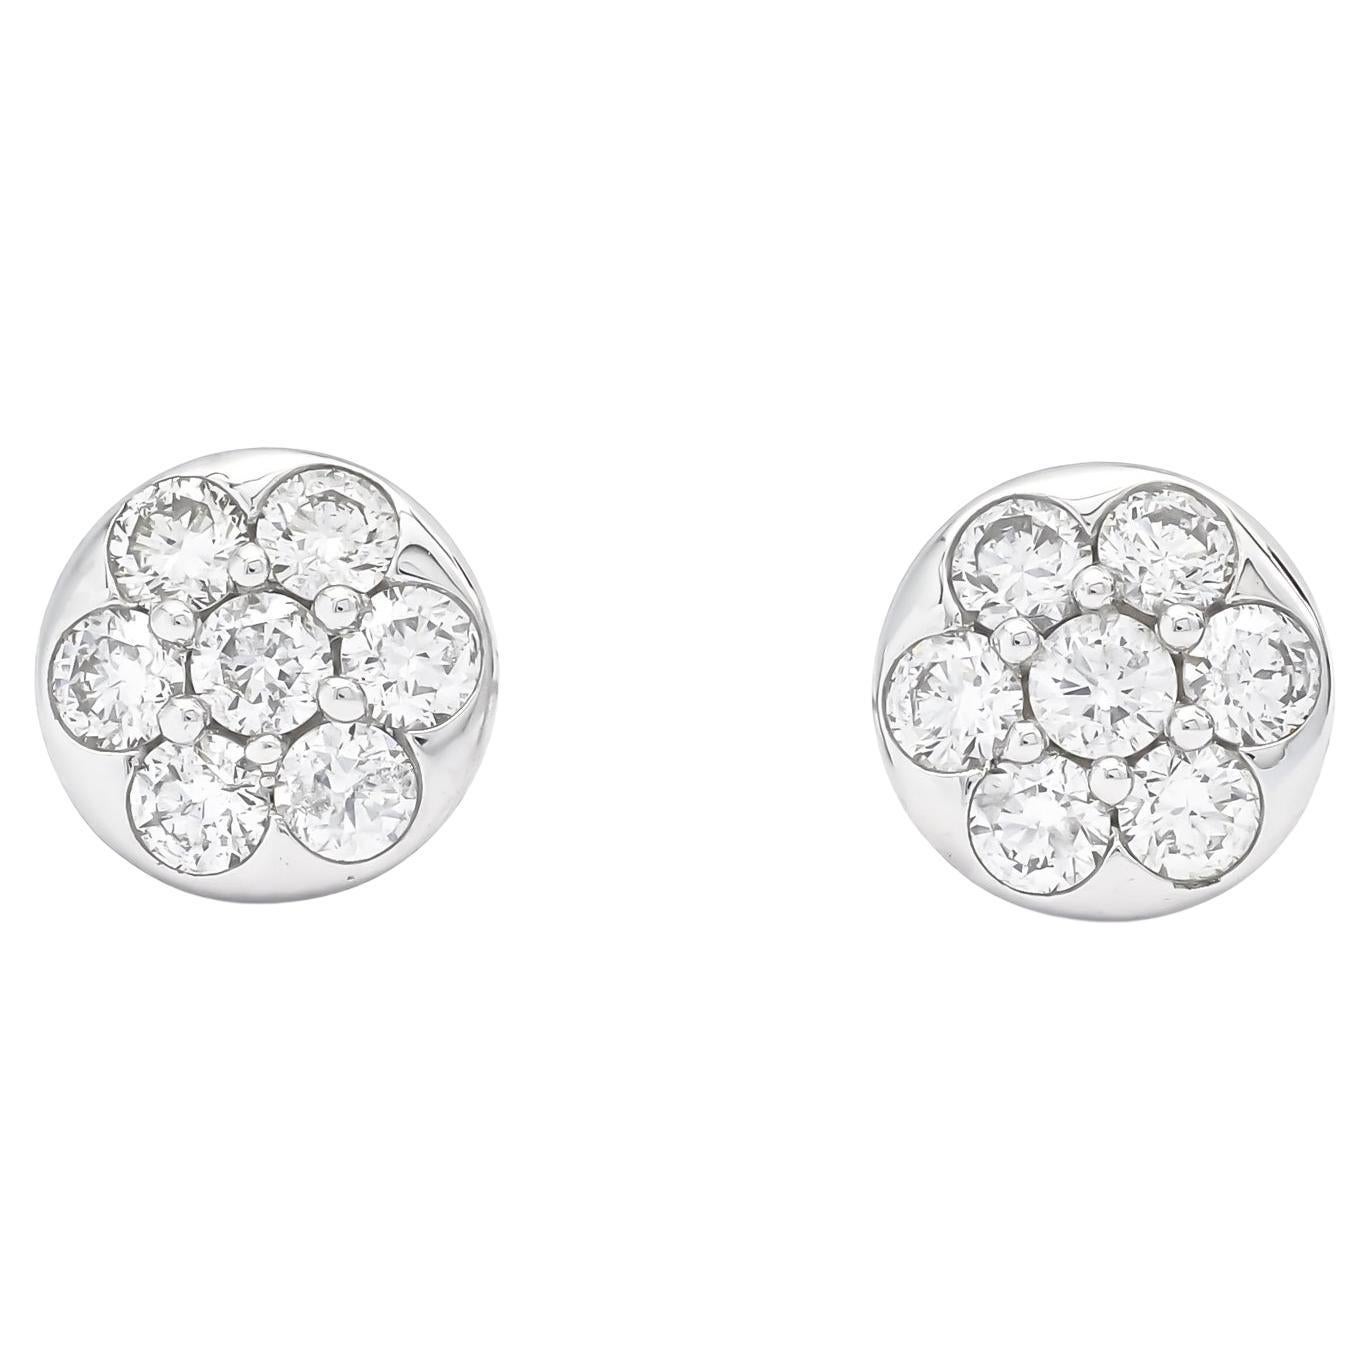  Natural Diamonds 0.55 cts 18KT White Gold Cluster Classic Stud Earrings E05172 For Sale